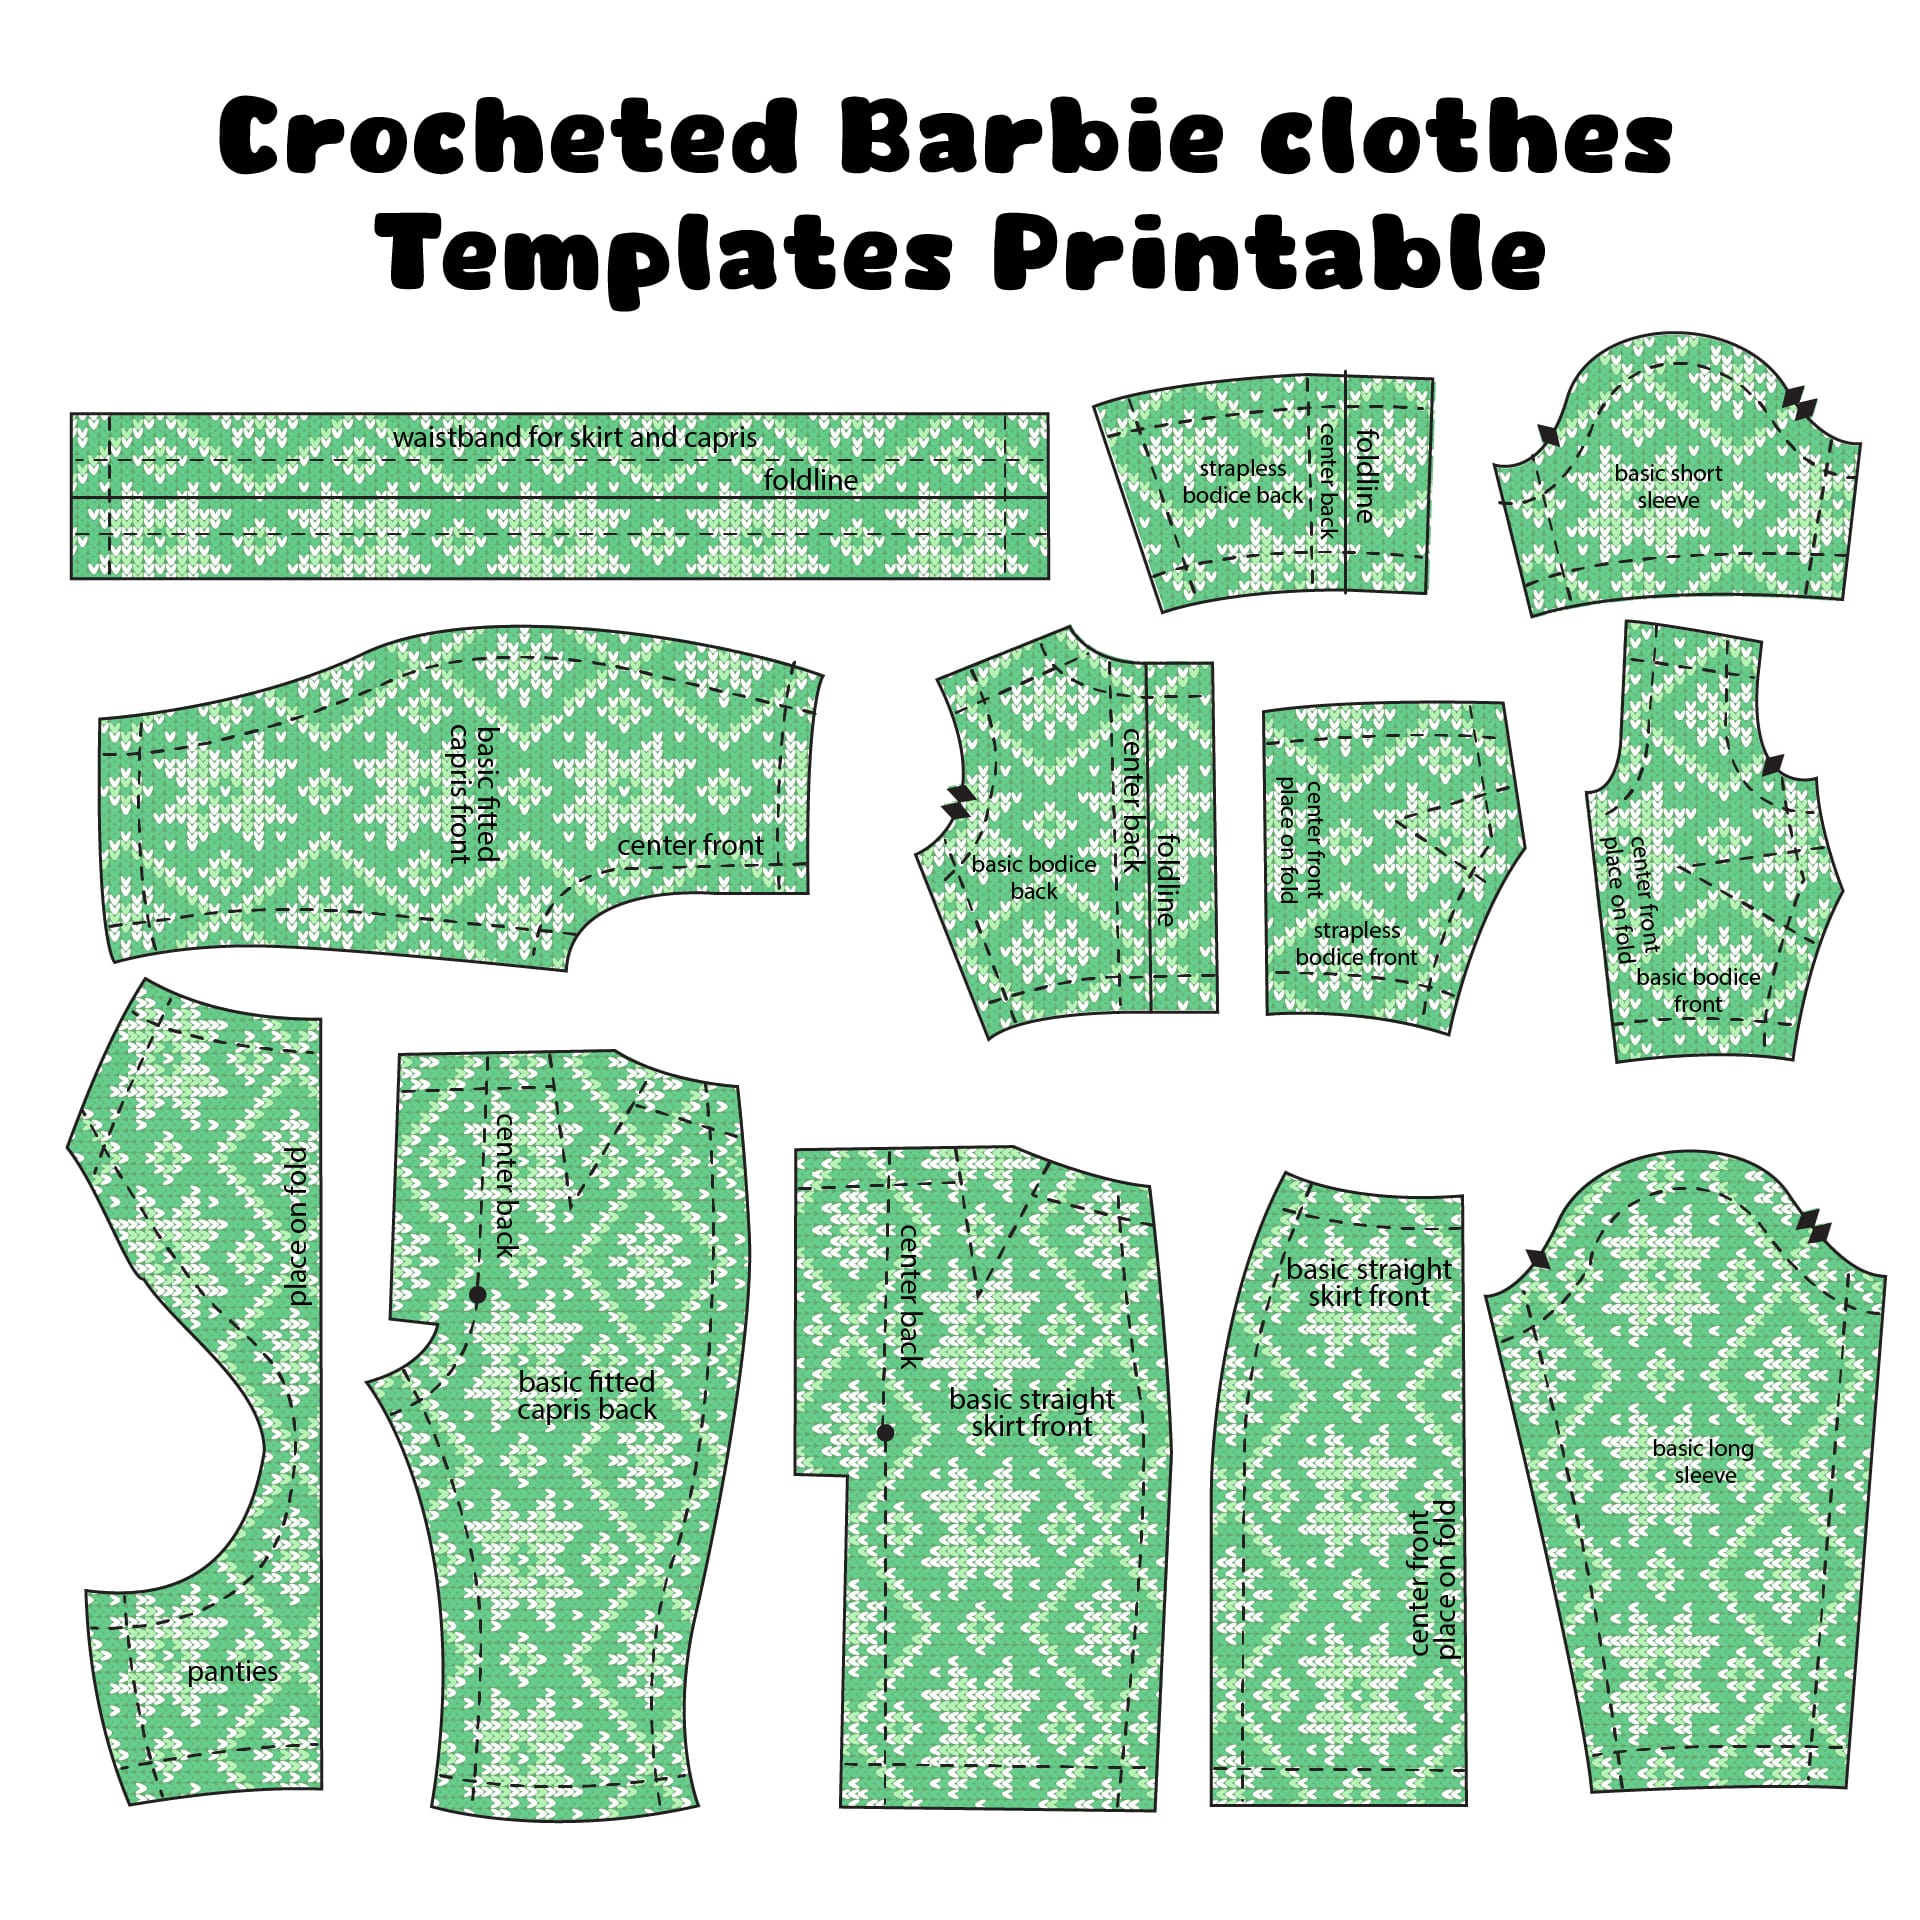 Crocheted Barbie Clothes Templates Printable